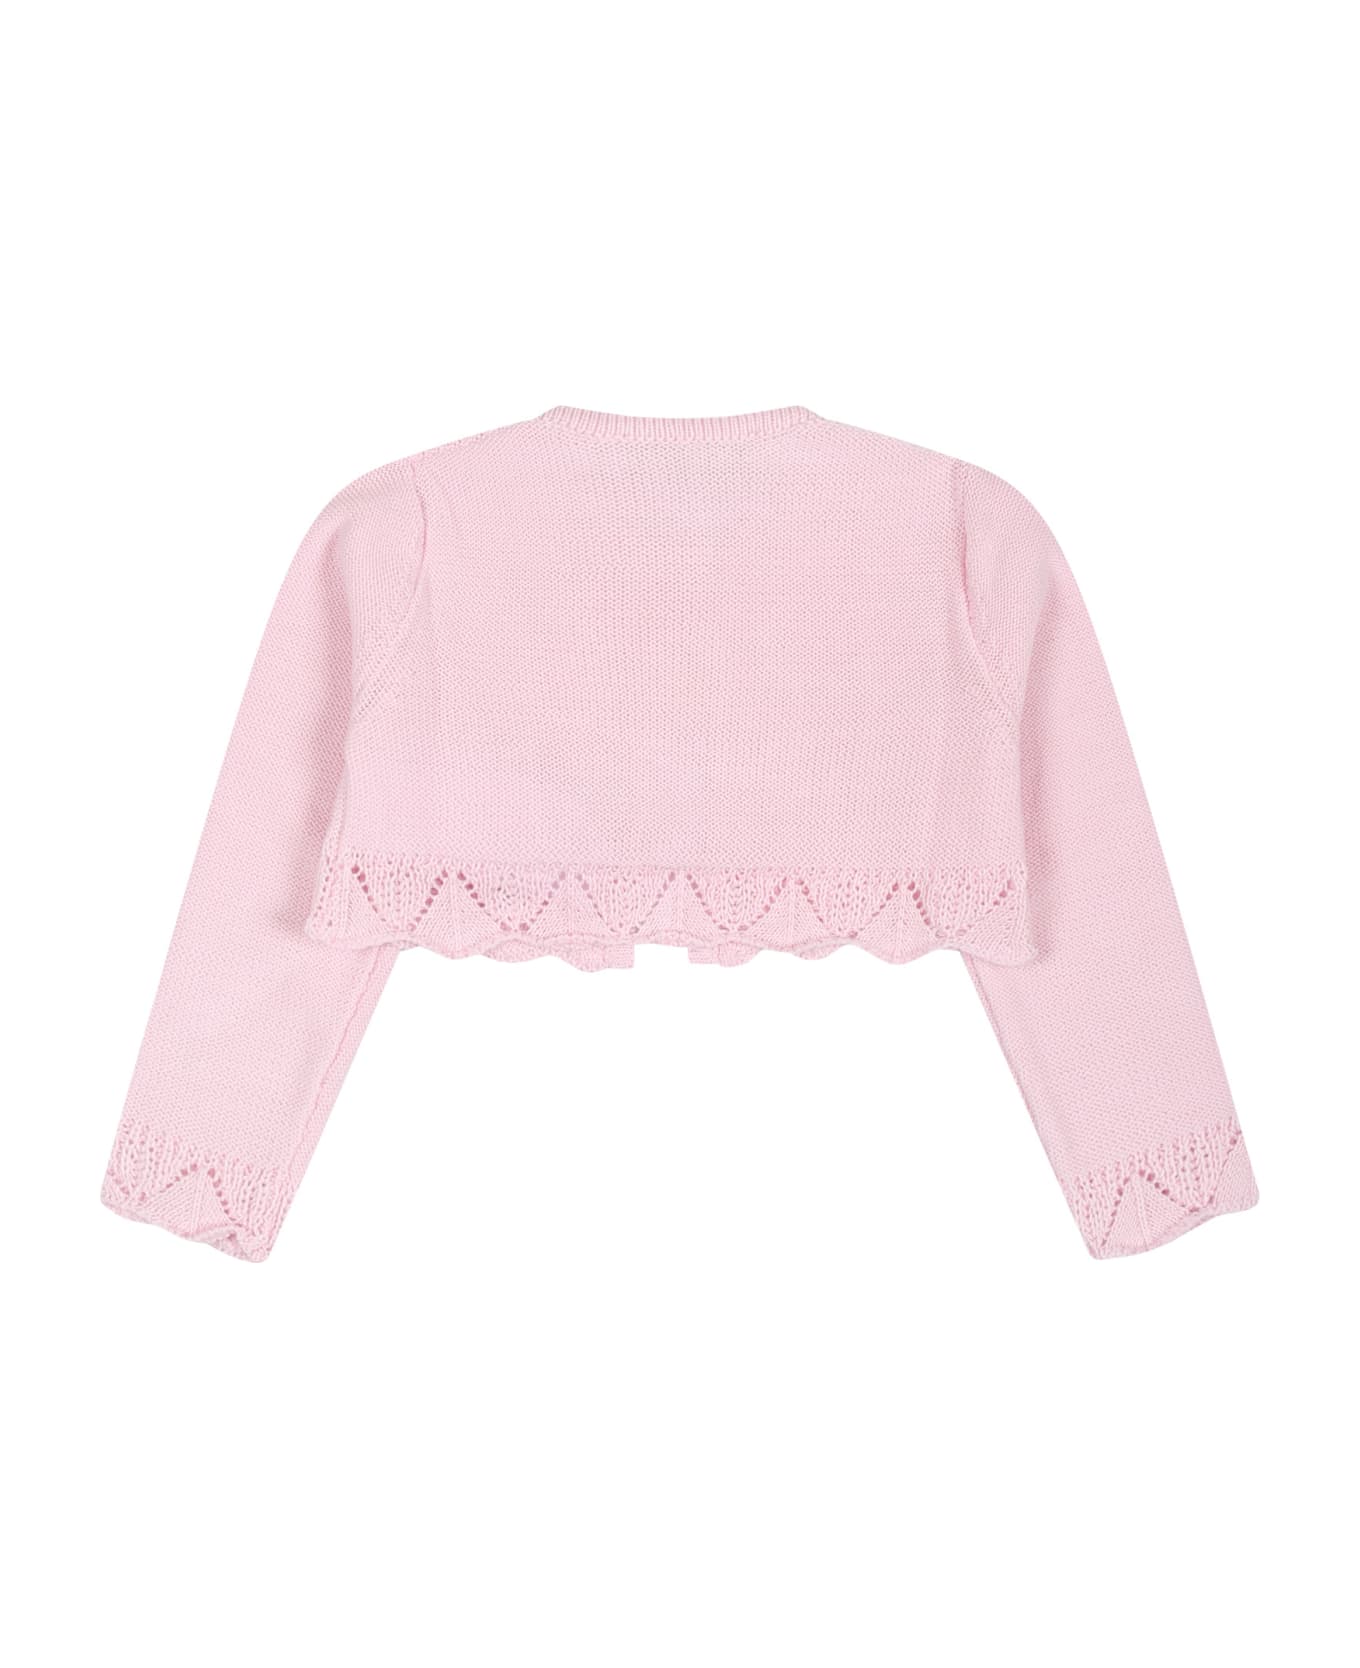 Monnalisa Pink Cardigan For Baby Girl With Ruffles - Pink